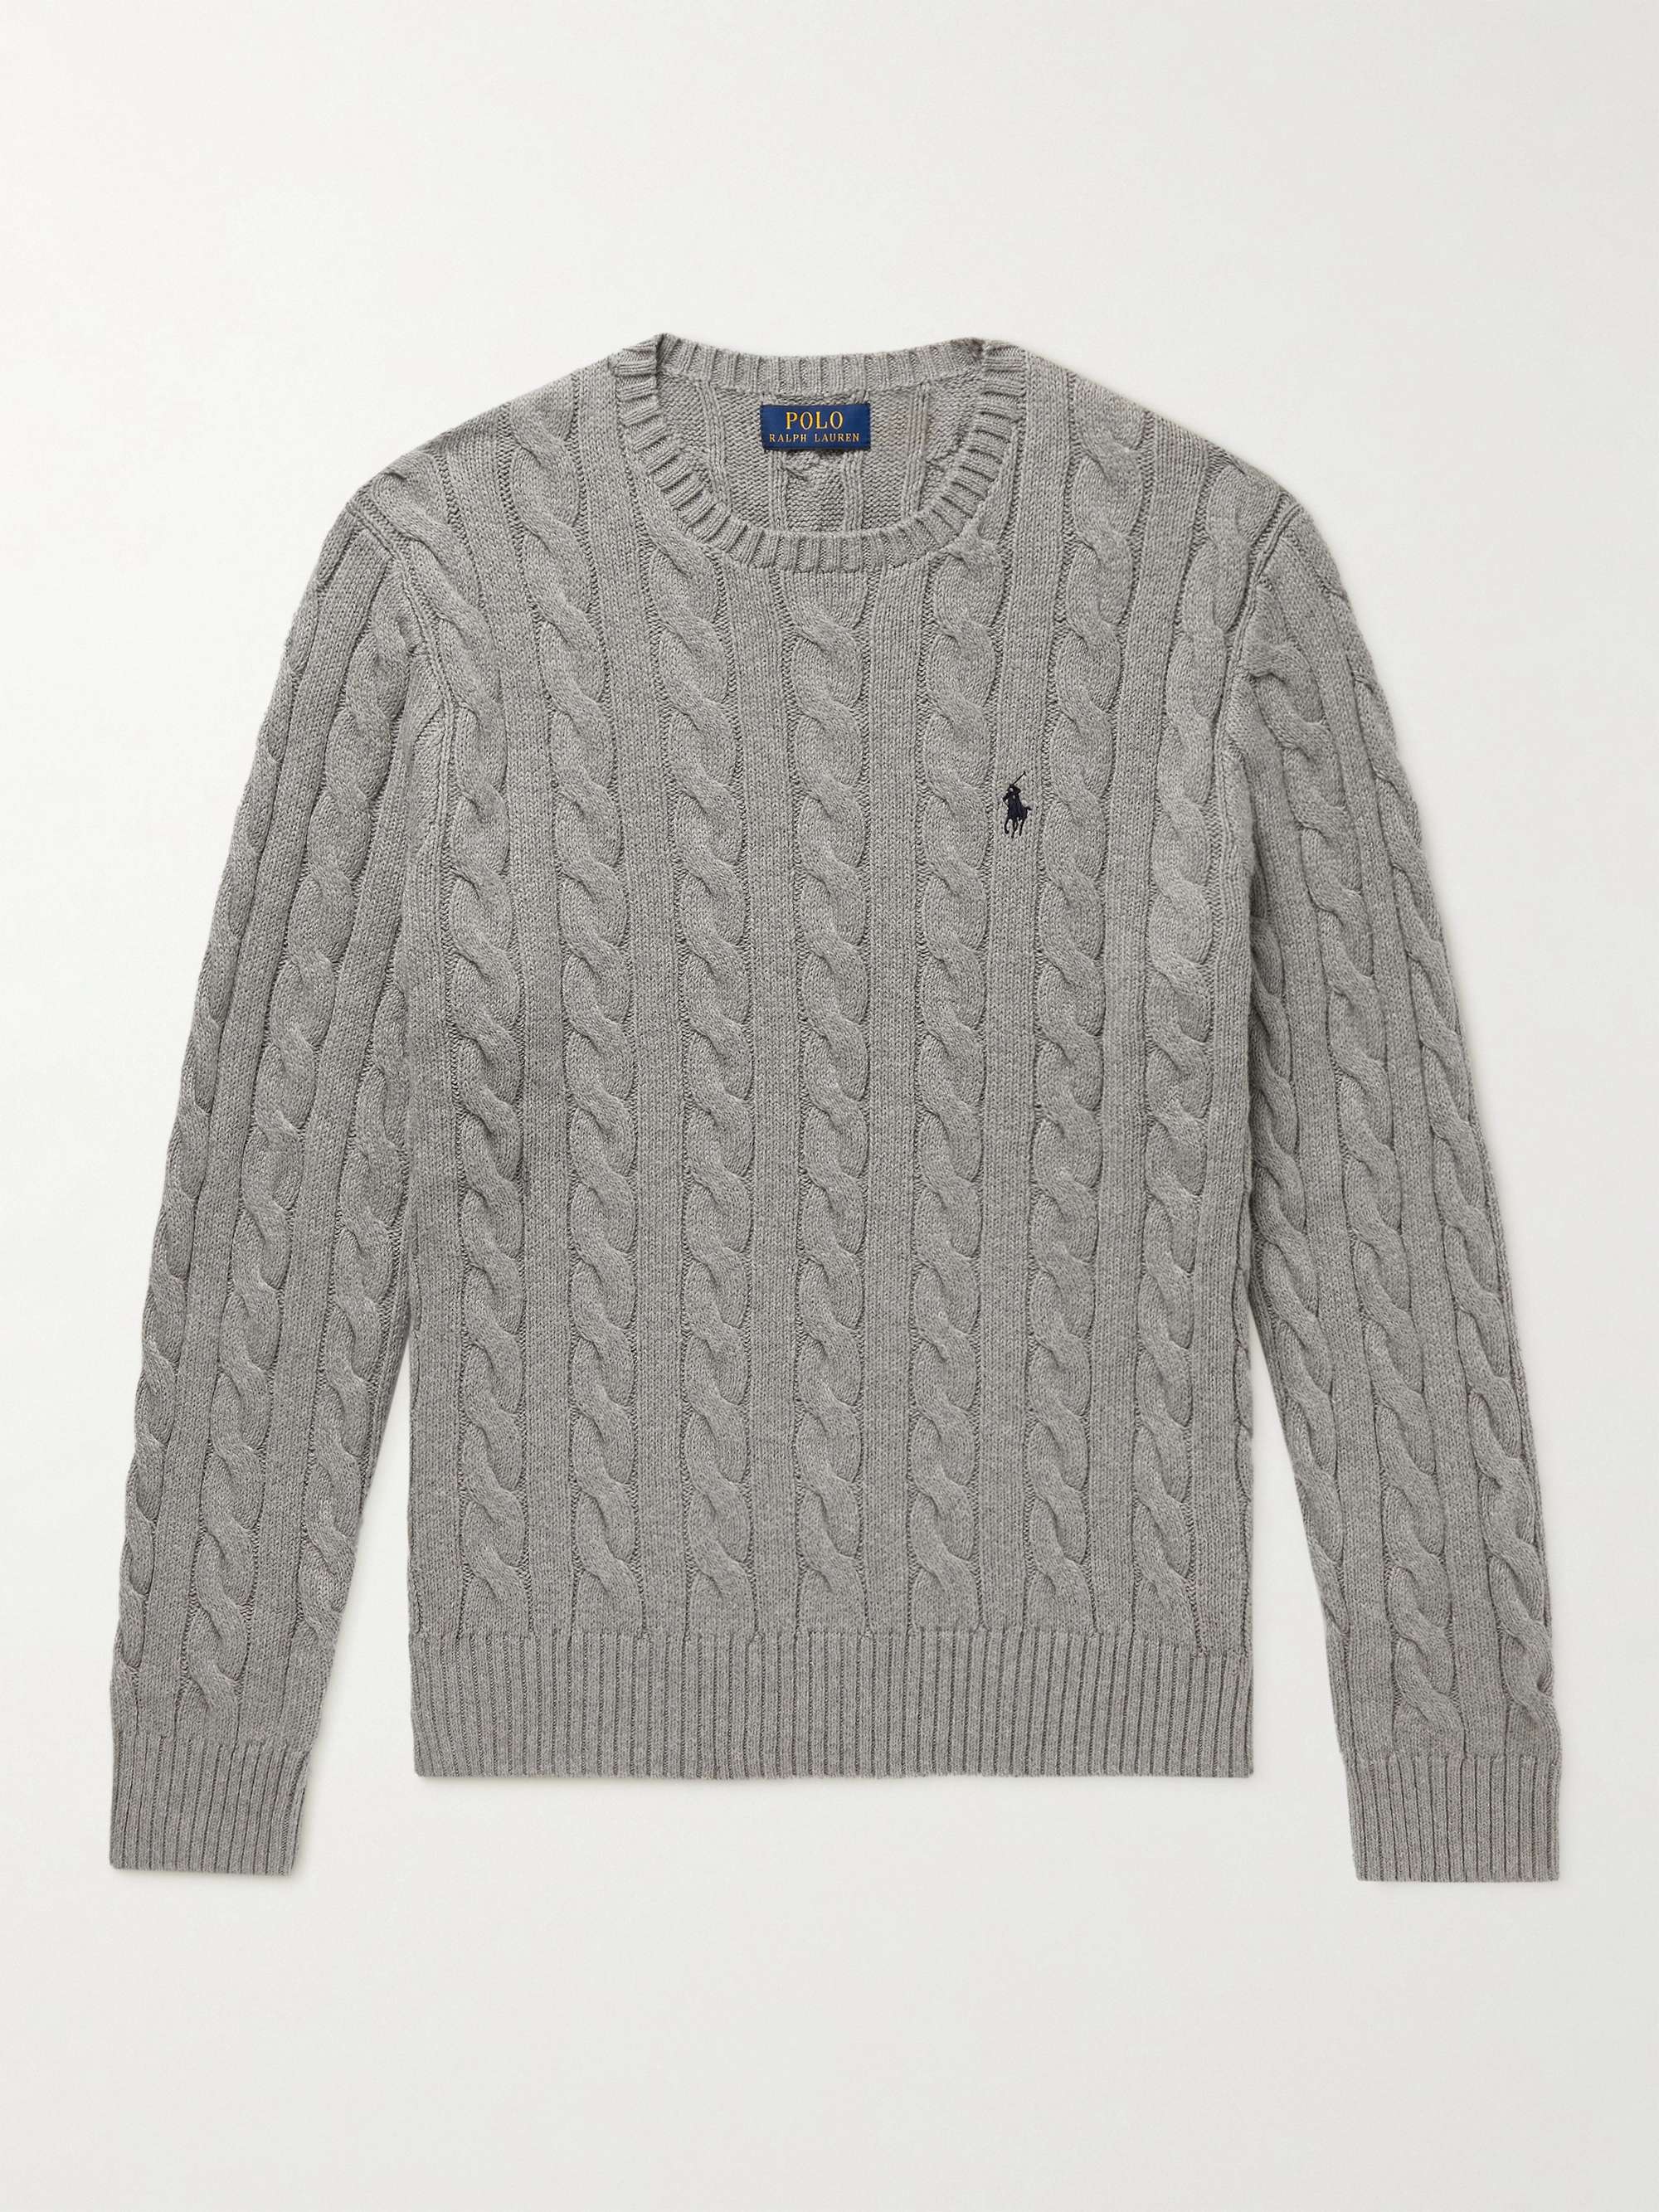 POLO RALPH LAUREN Logo-Embroidered Cable-Knit Cotton Sweater